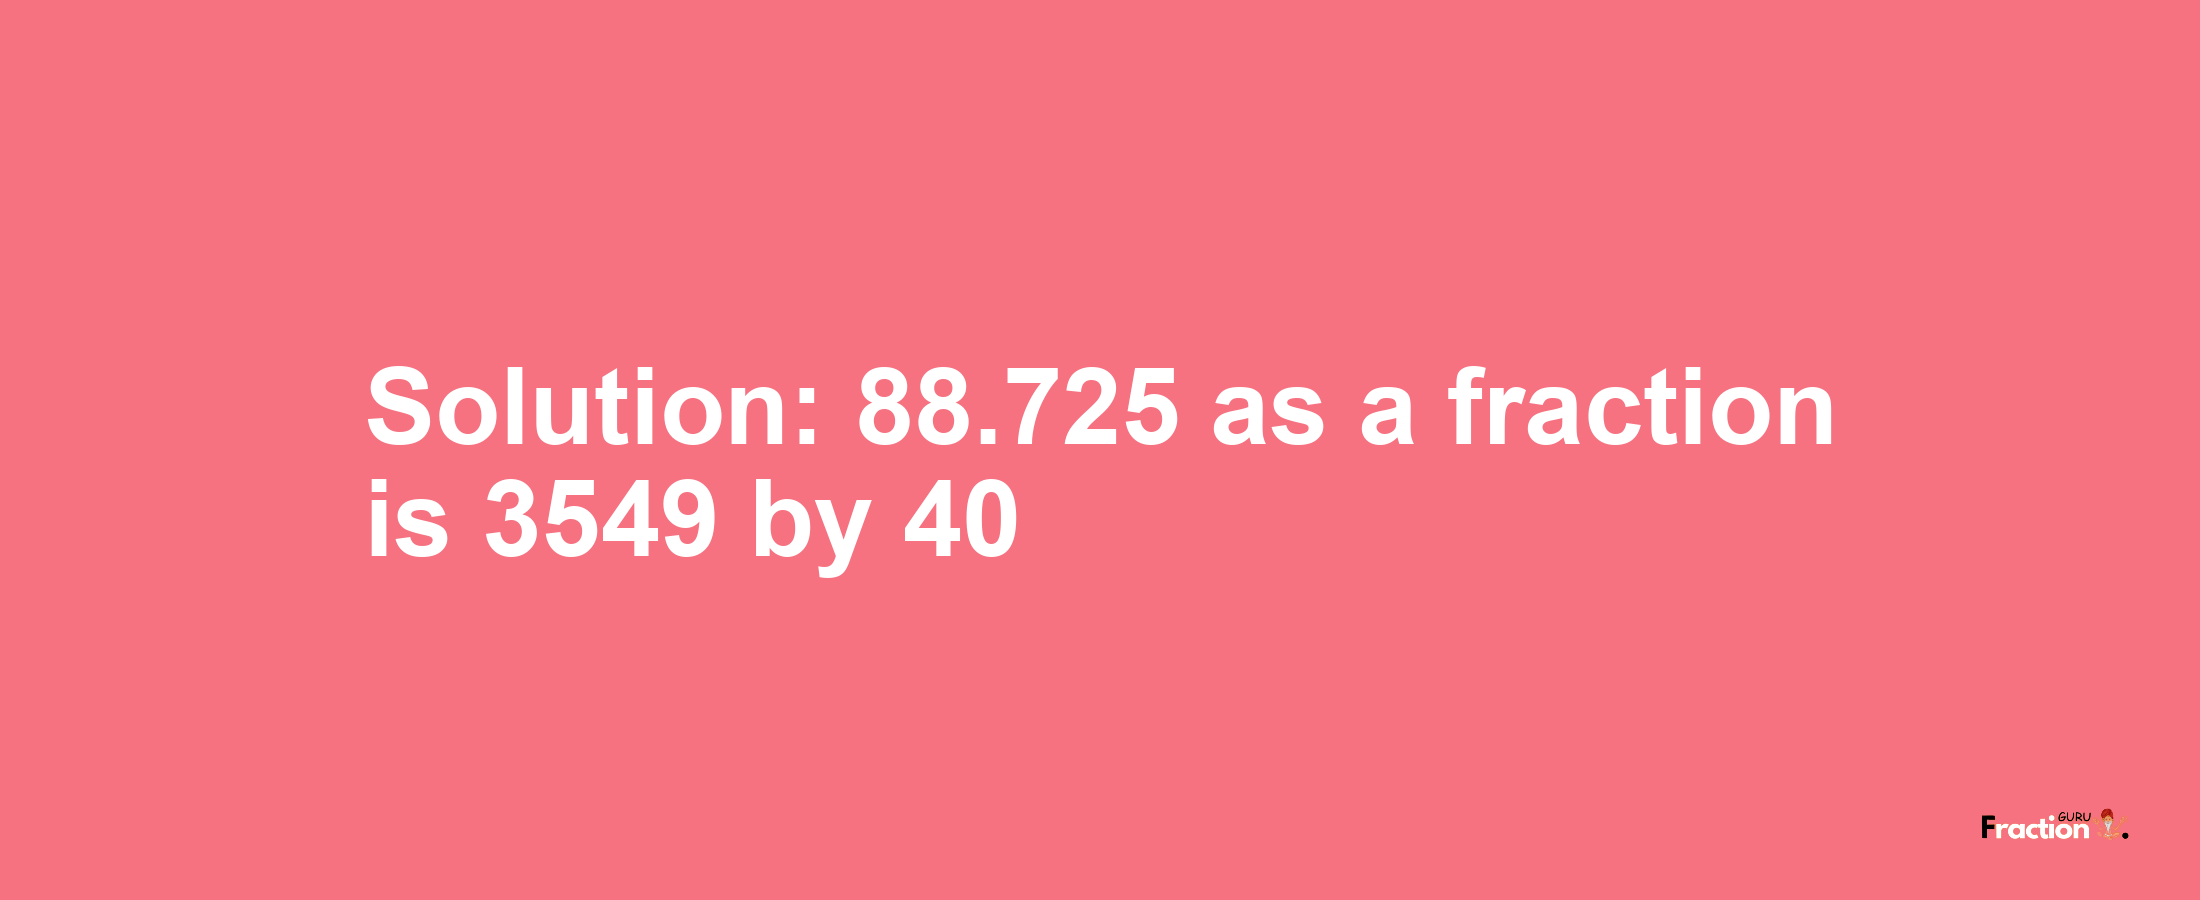 Solution:88.725 as a fraction is 3549/40